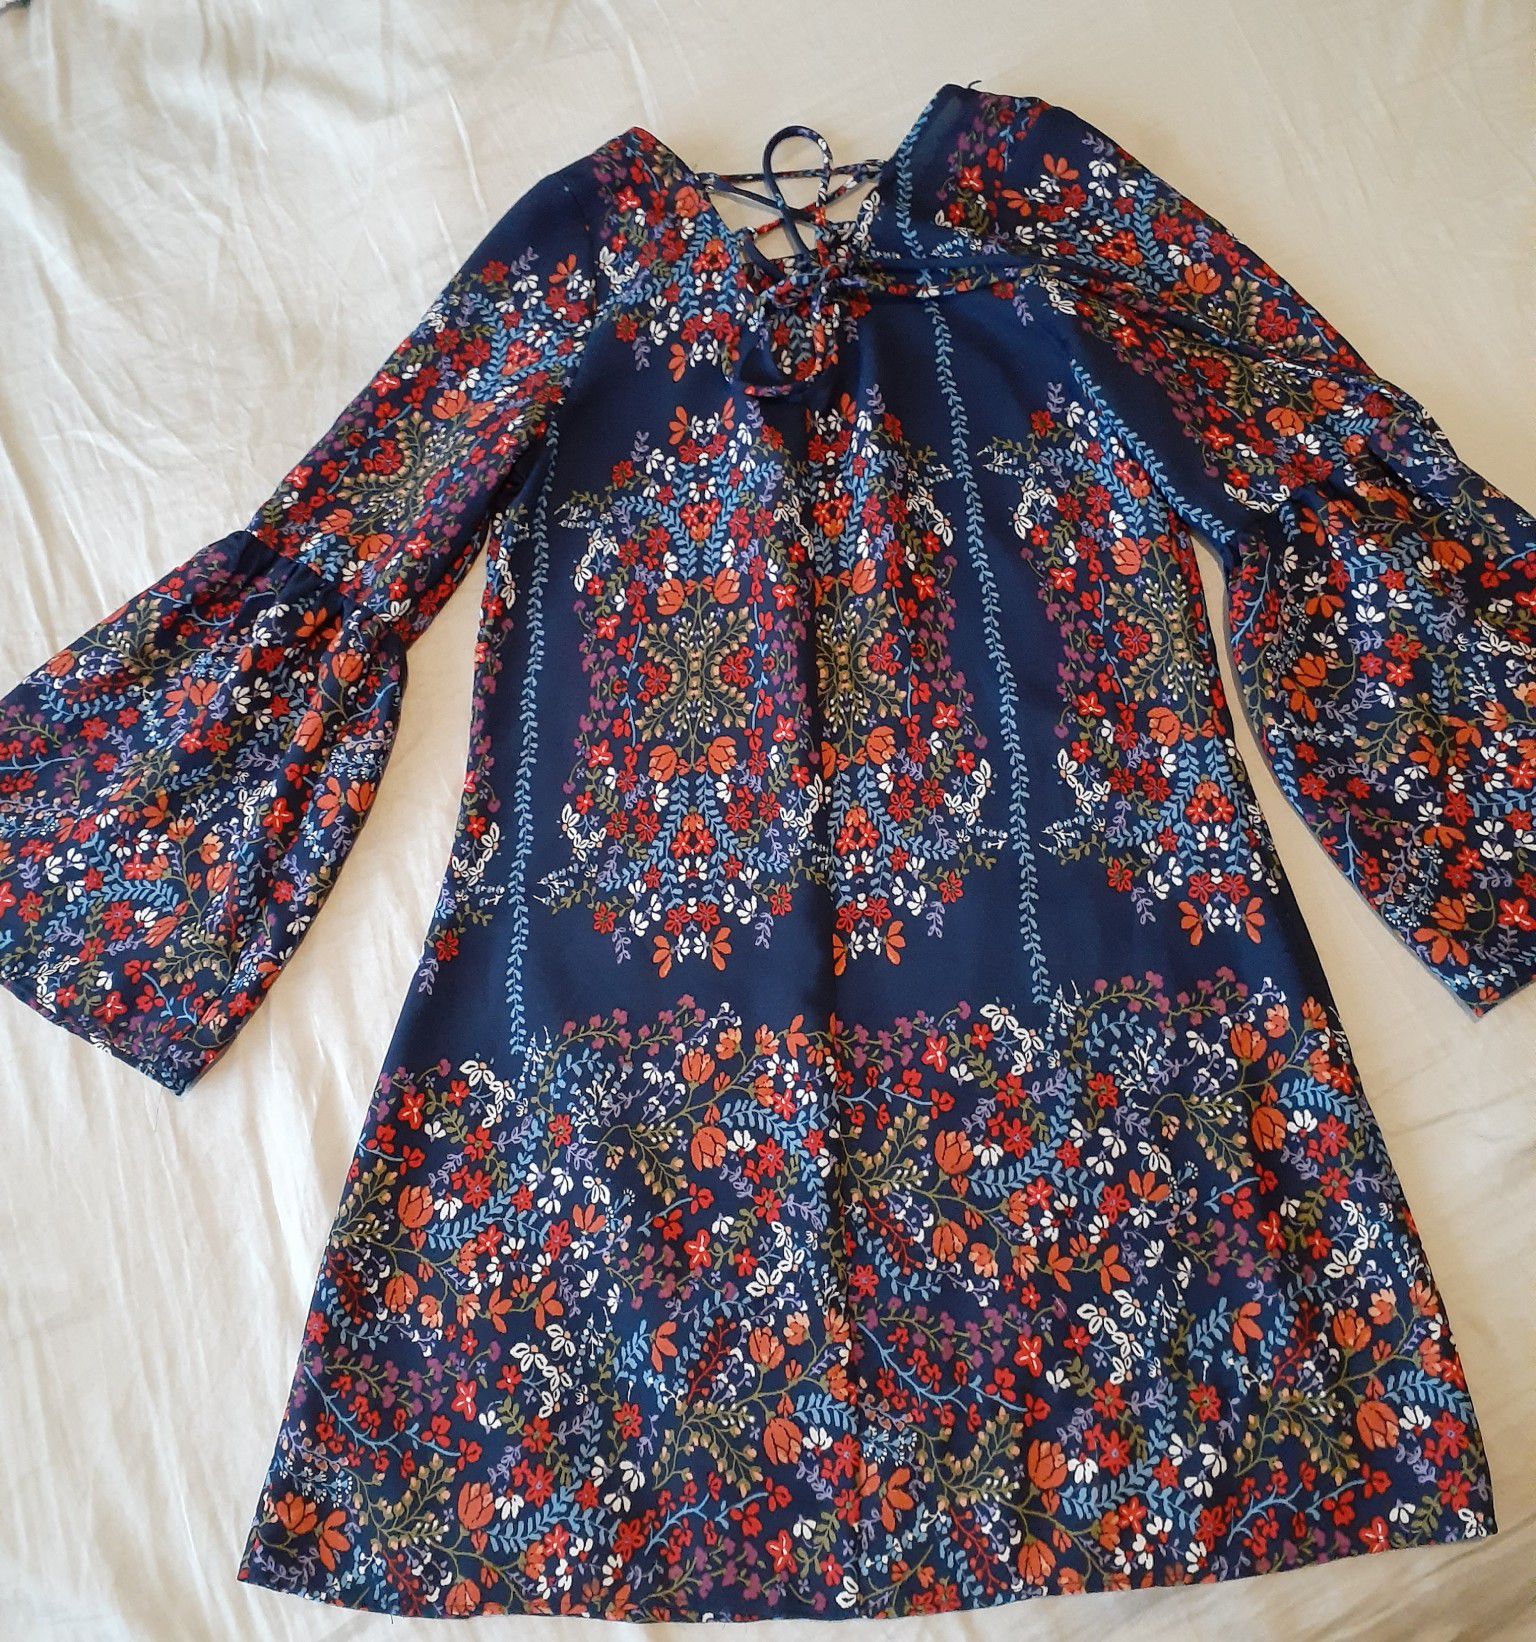 EUC girls spring dress, great for Easter. Size 8.